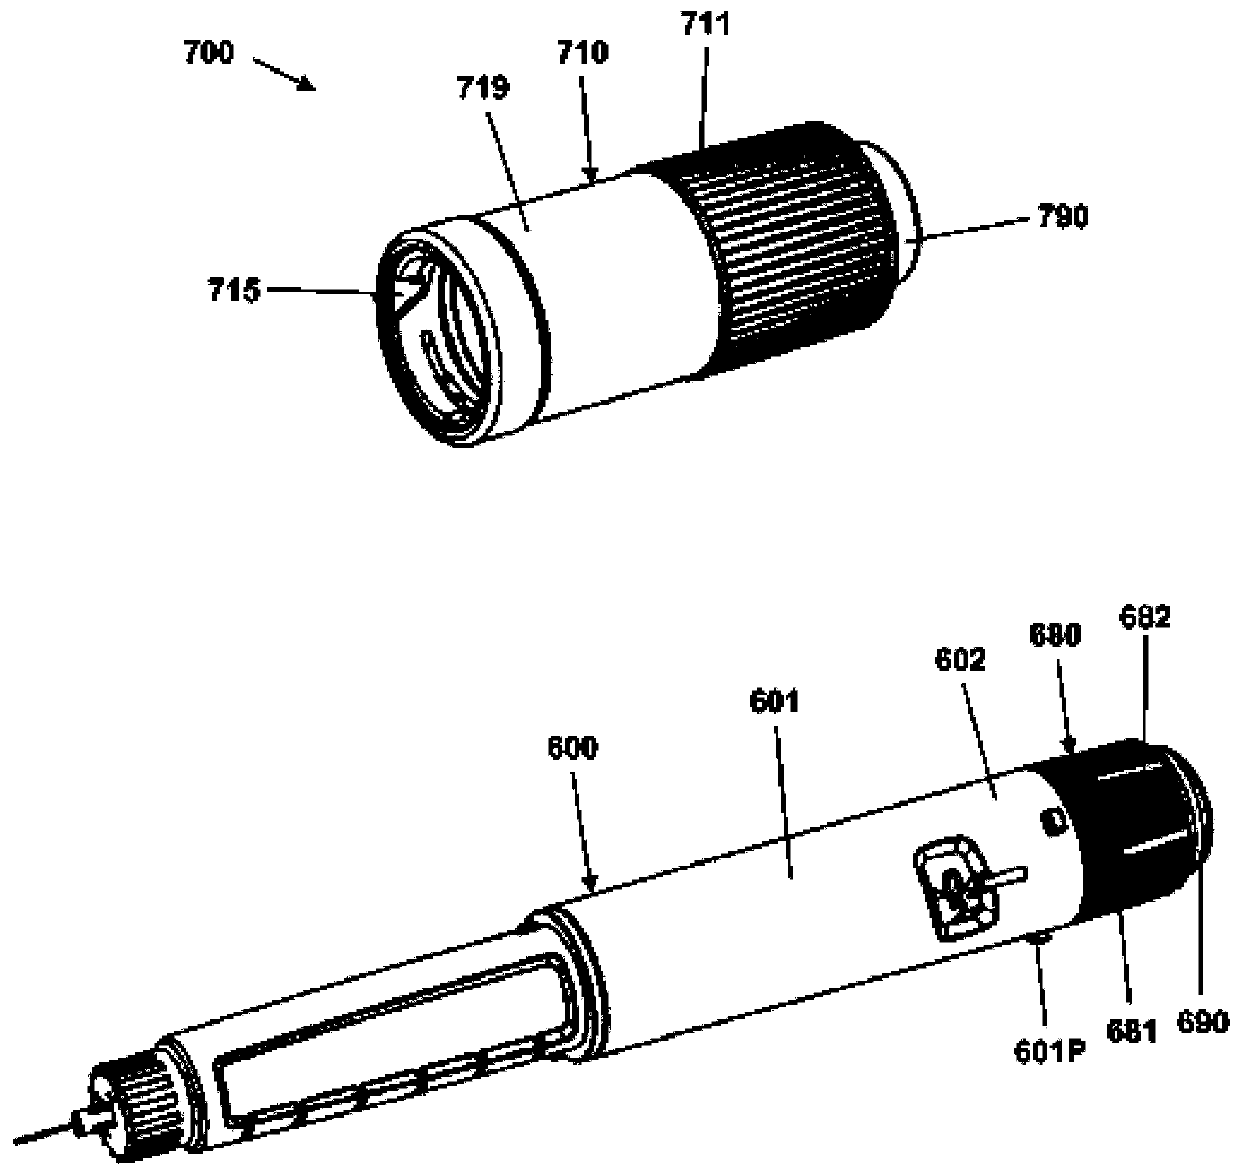 Accessory device for drug delivery device